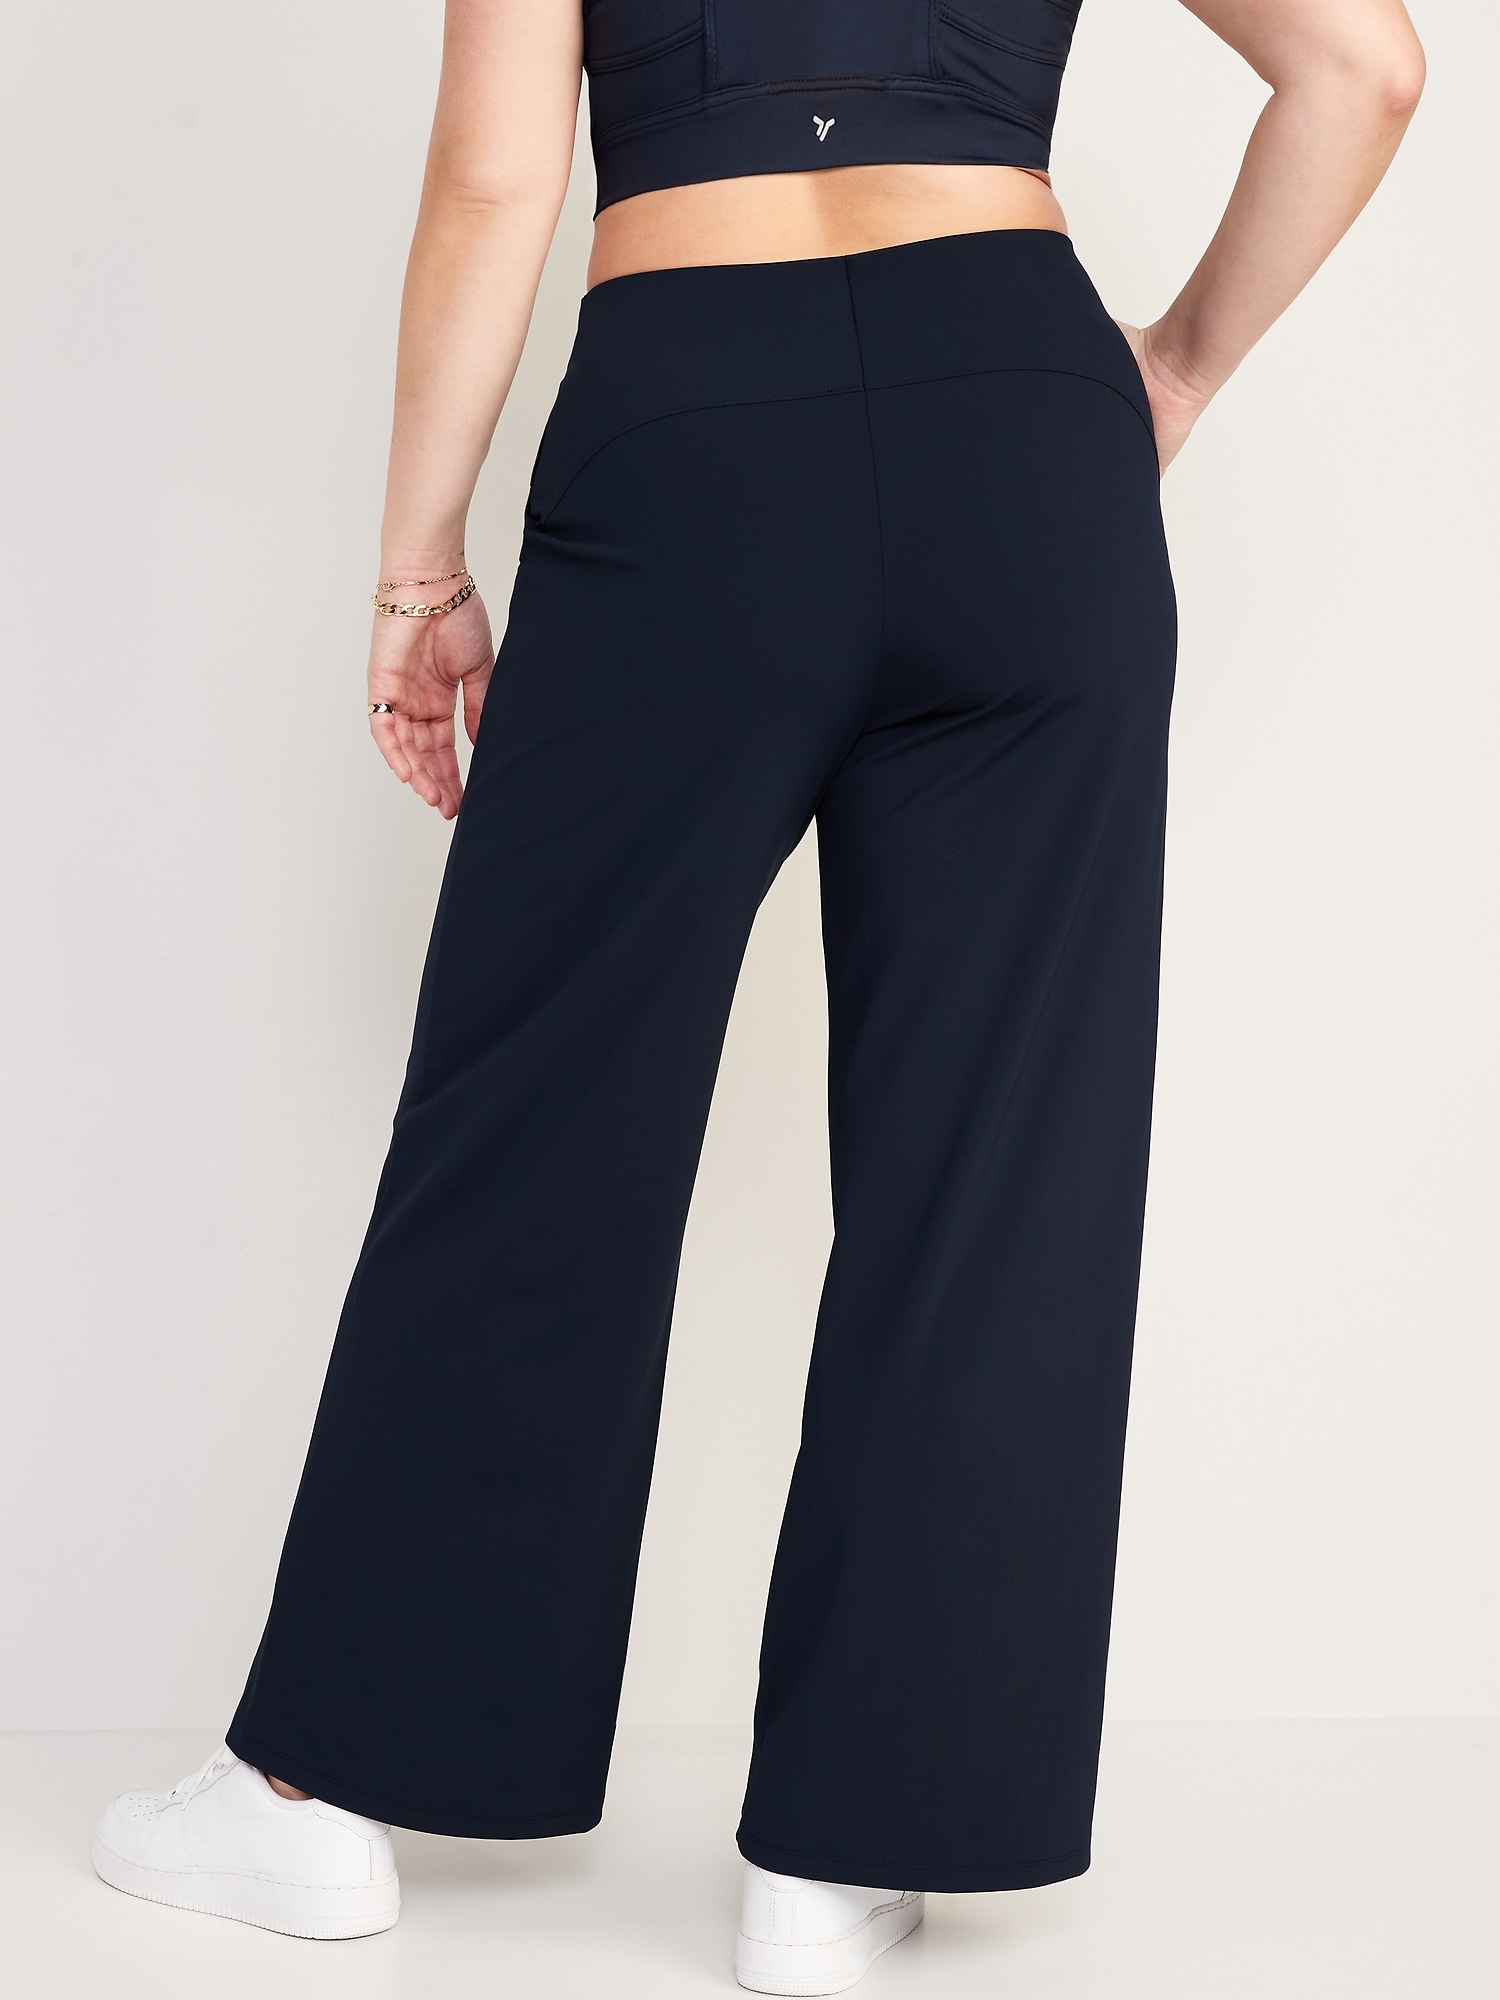 Can someone help me with sizing if I'm a male with a size 31 in pants  looking to buy the female wide leg pants regarding which size to go for ?  XL ? 